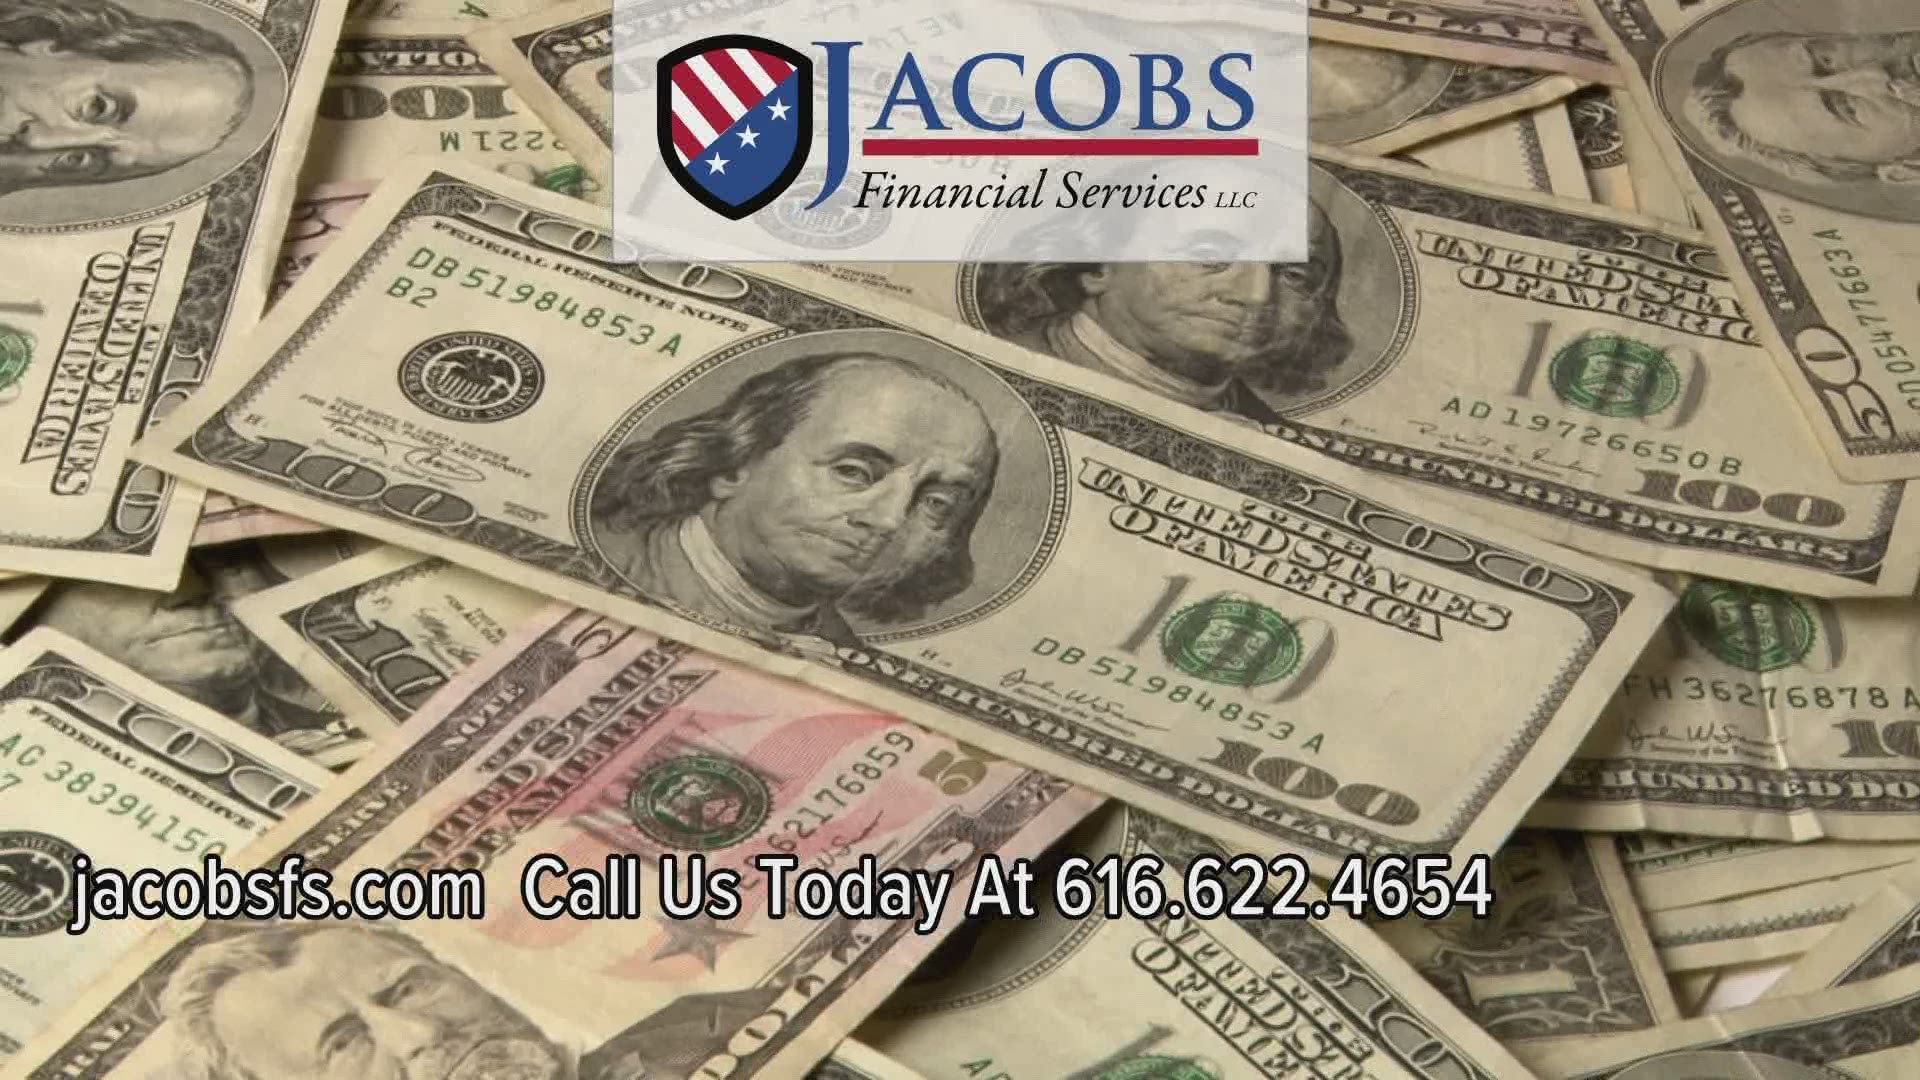 If you’d like to get in on the action but you’re not sure which moves to make, Tom Jacobs and the team from Jacobs Financial Services can help.